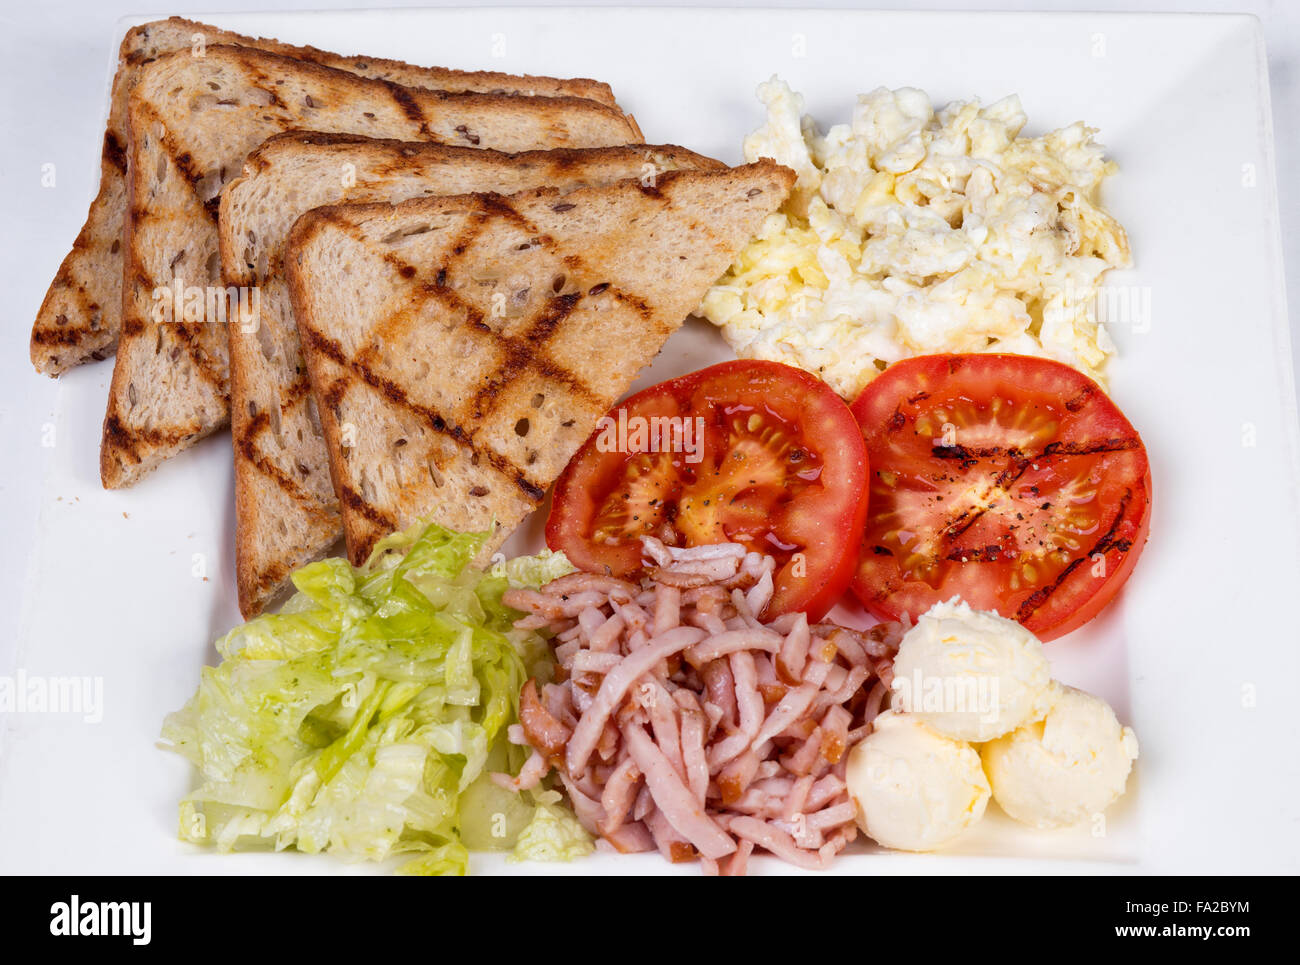 Traditional English breakfast with scrambled eggs, tomatoes, potatoes, toast and fresh salad Stock Photo